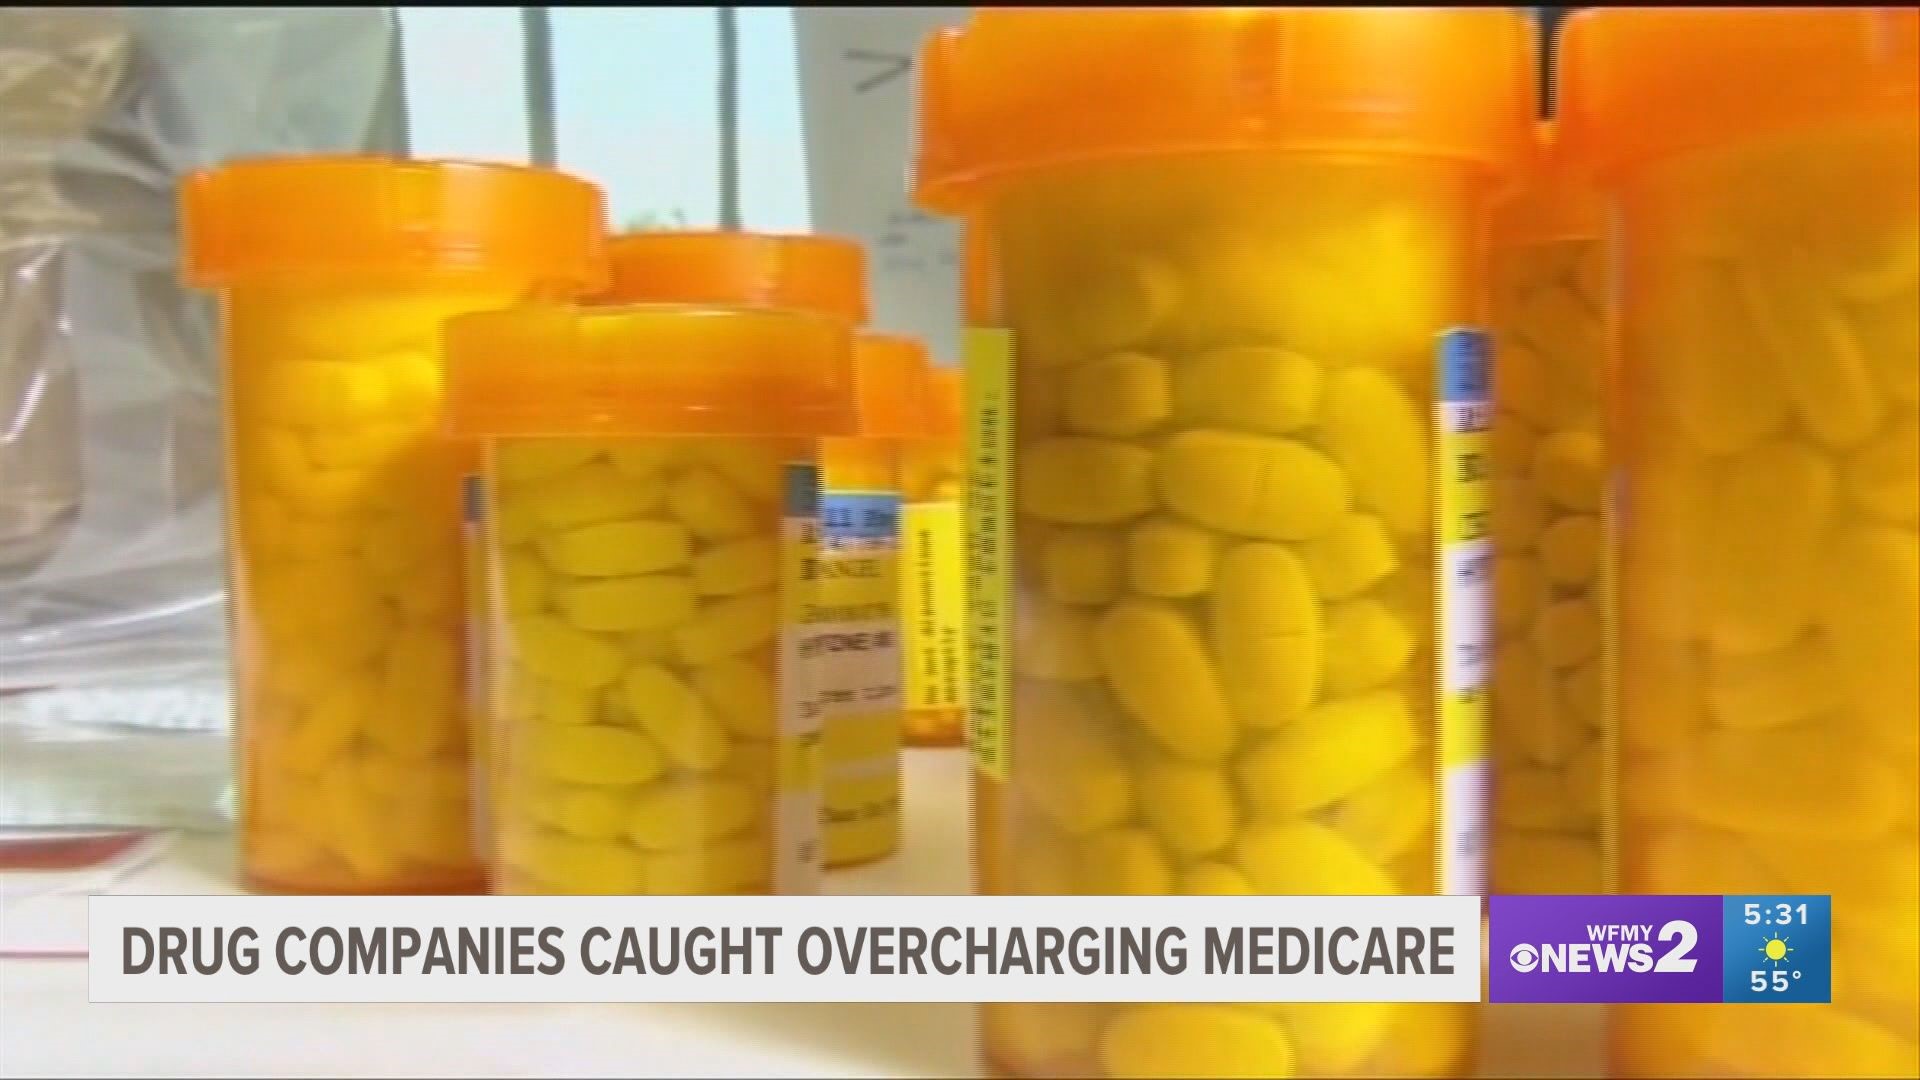 Medicare beneficiaries who take one of the 27 drugs listed will save between $9 and $390 on their out-of-pocket drug costs in April.